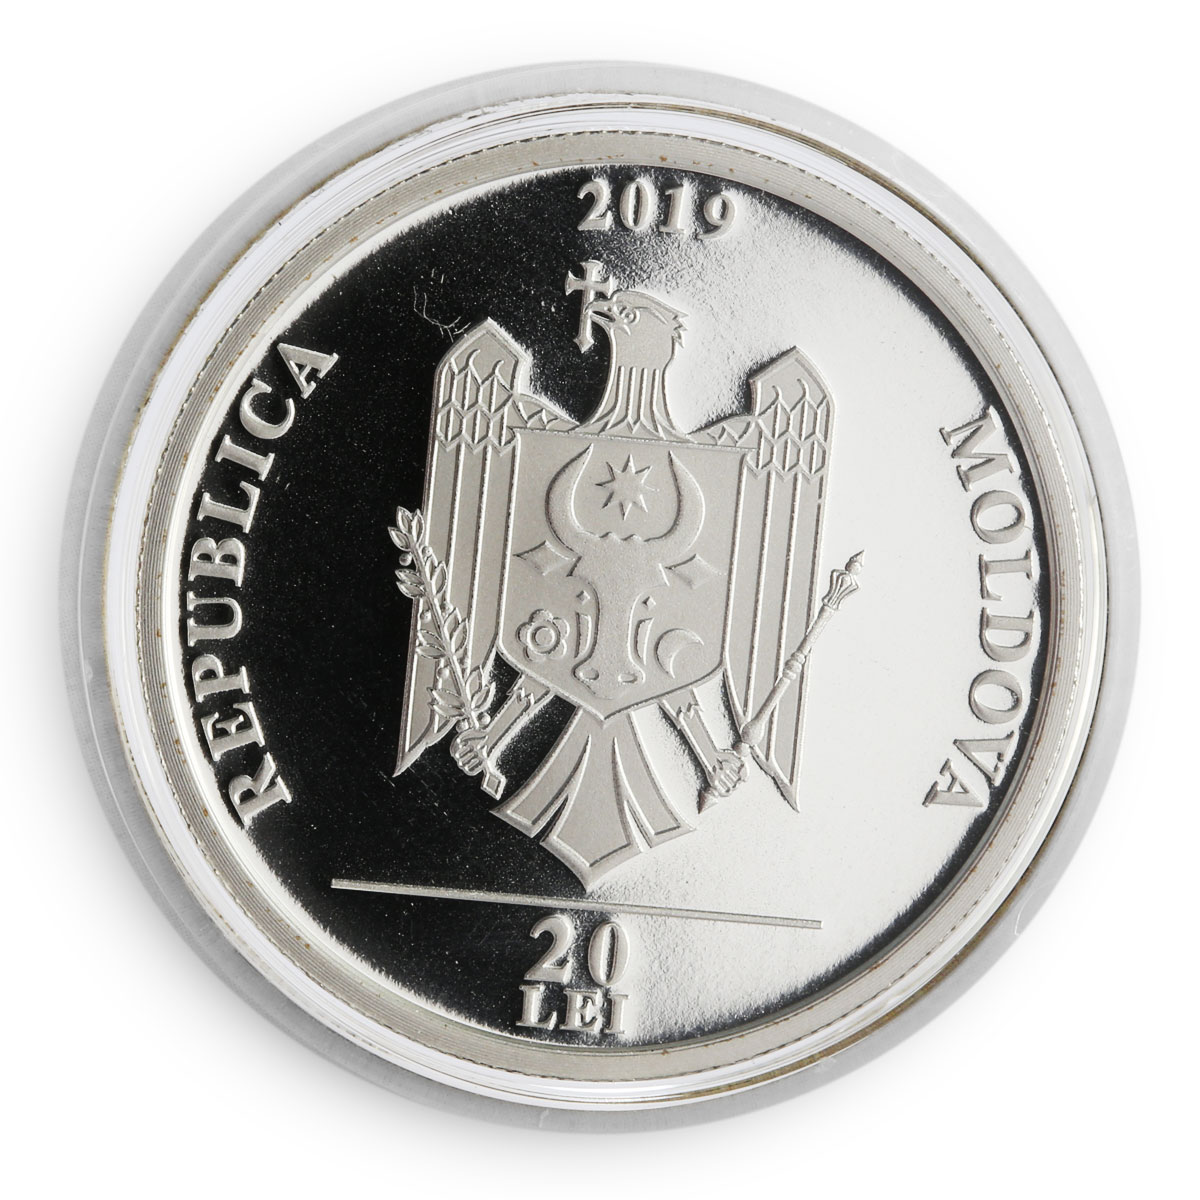 Moldova 20 lei Goat with Three Kids fairy tale folklore proof coin 2019